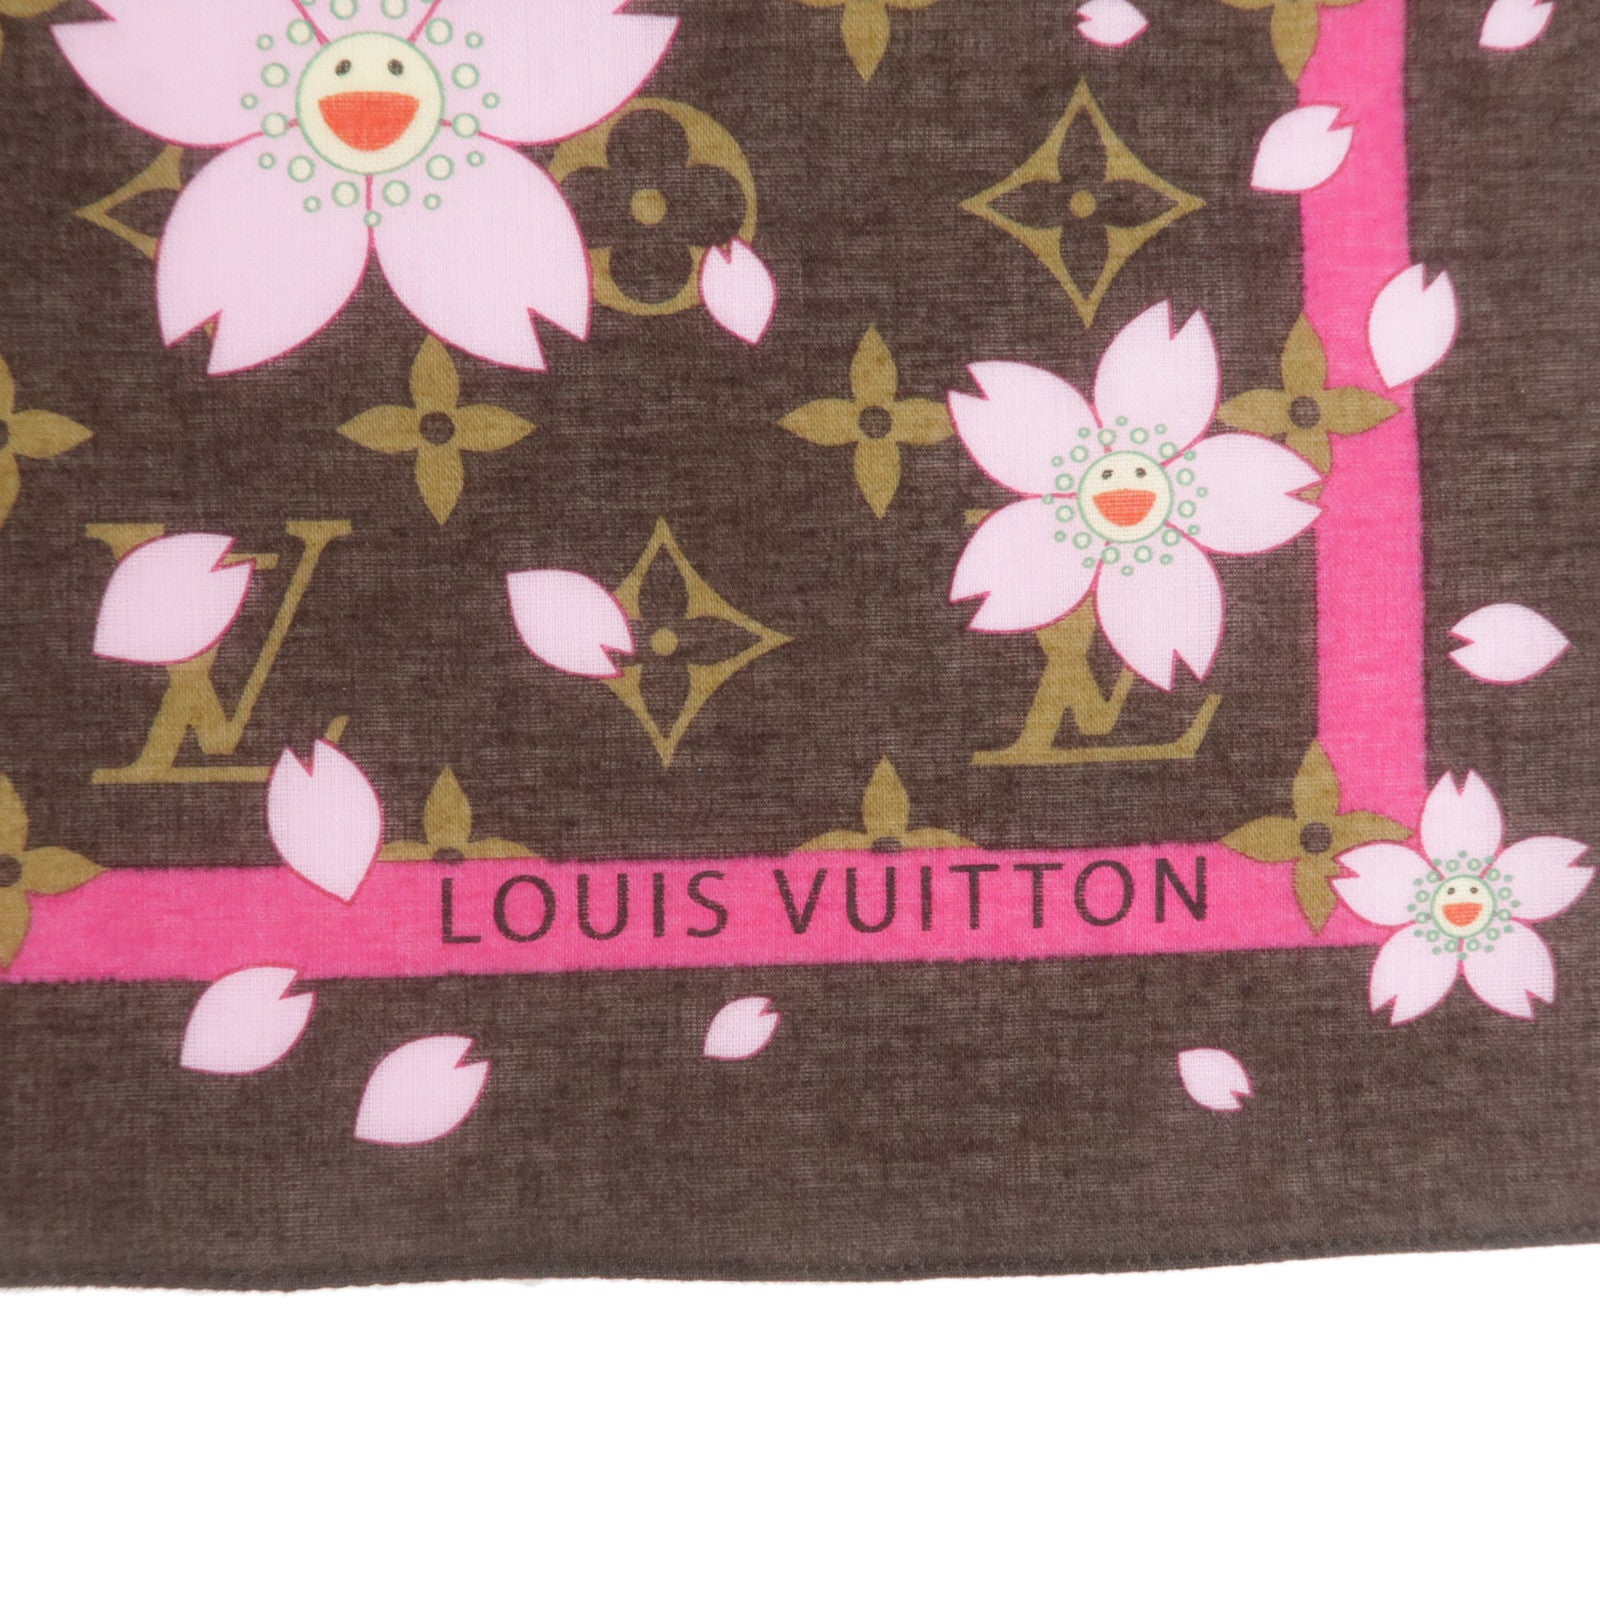 SOLD !! Louis Vuitton cherry blossom scarf. SOLD !